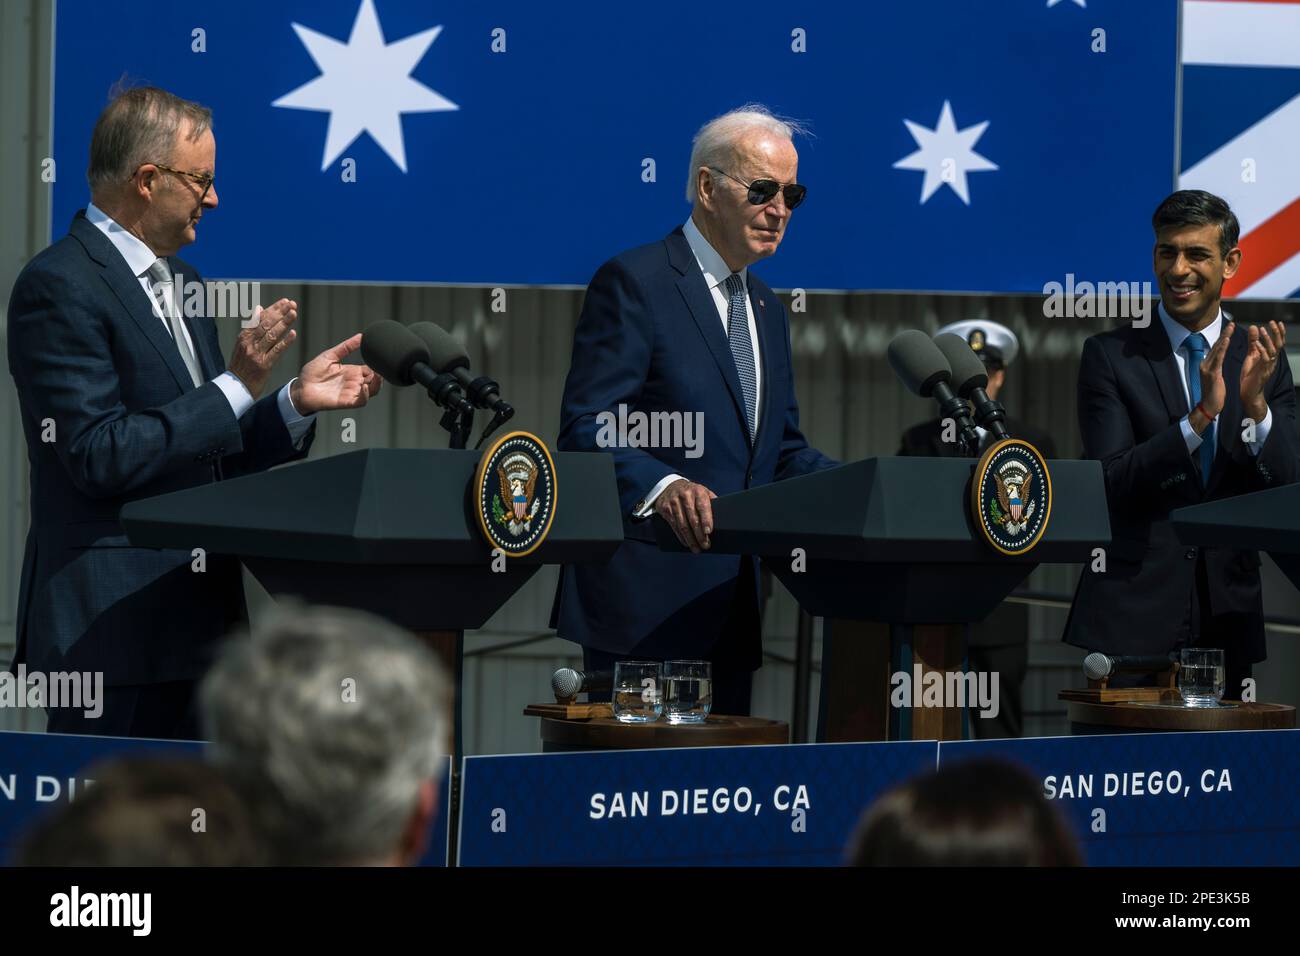 San Diego, United States of America. 13 March, 2023. U.S President Joe Biden, center, responds to a question as British Prime Minister Rishi Sunak, right, and Australian Prime Minister Anthony Albanese, left, applaud during a press conference following their trilateral meeting at Point Loma naval base, March 13, 2023 in San Diego, California.  Credit: Chad McNeeley/DoD Photo/Alamy Live News Stock Photo